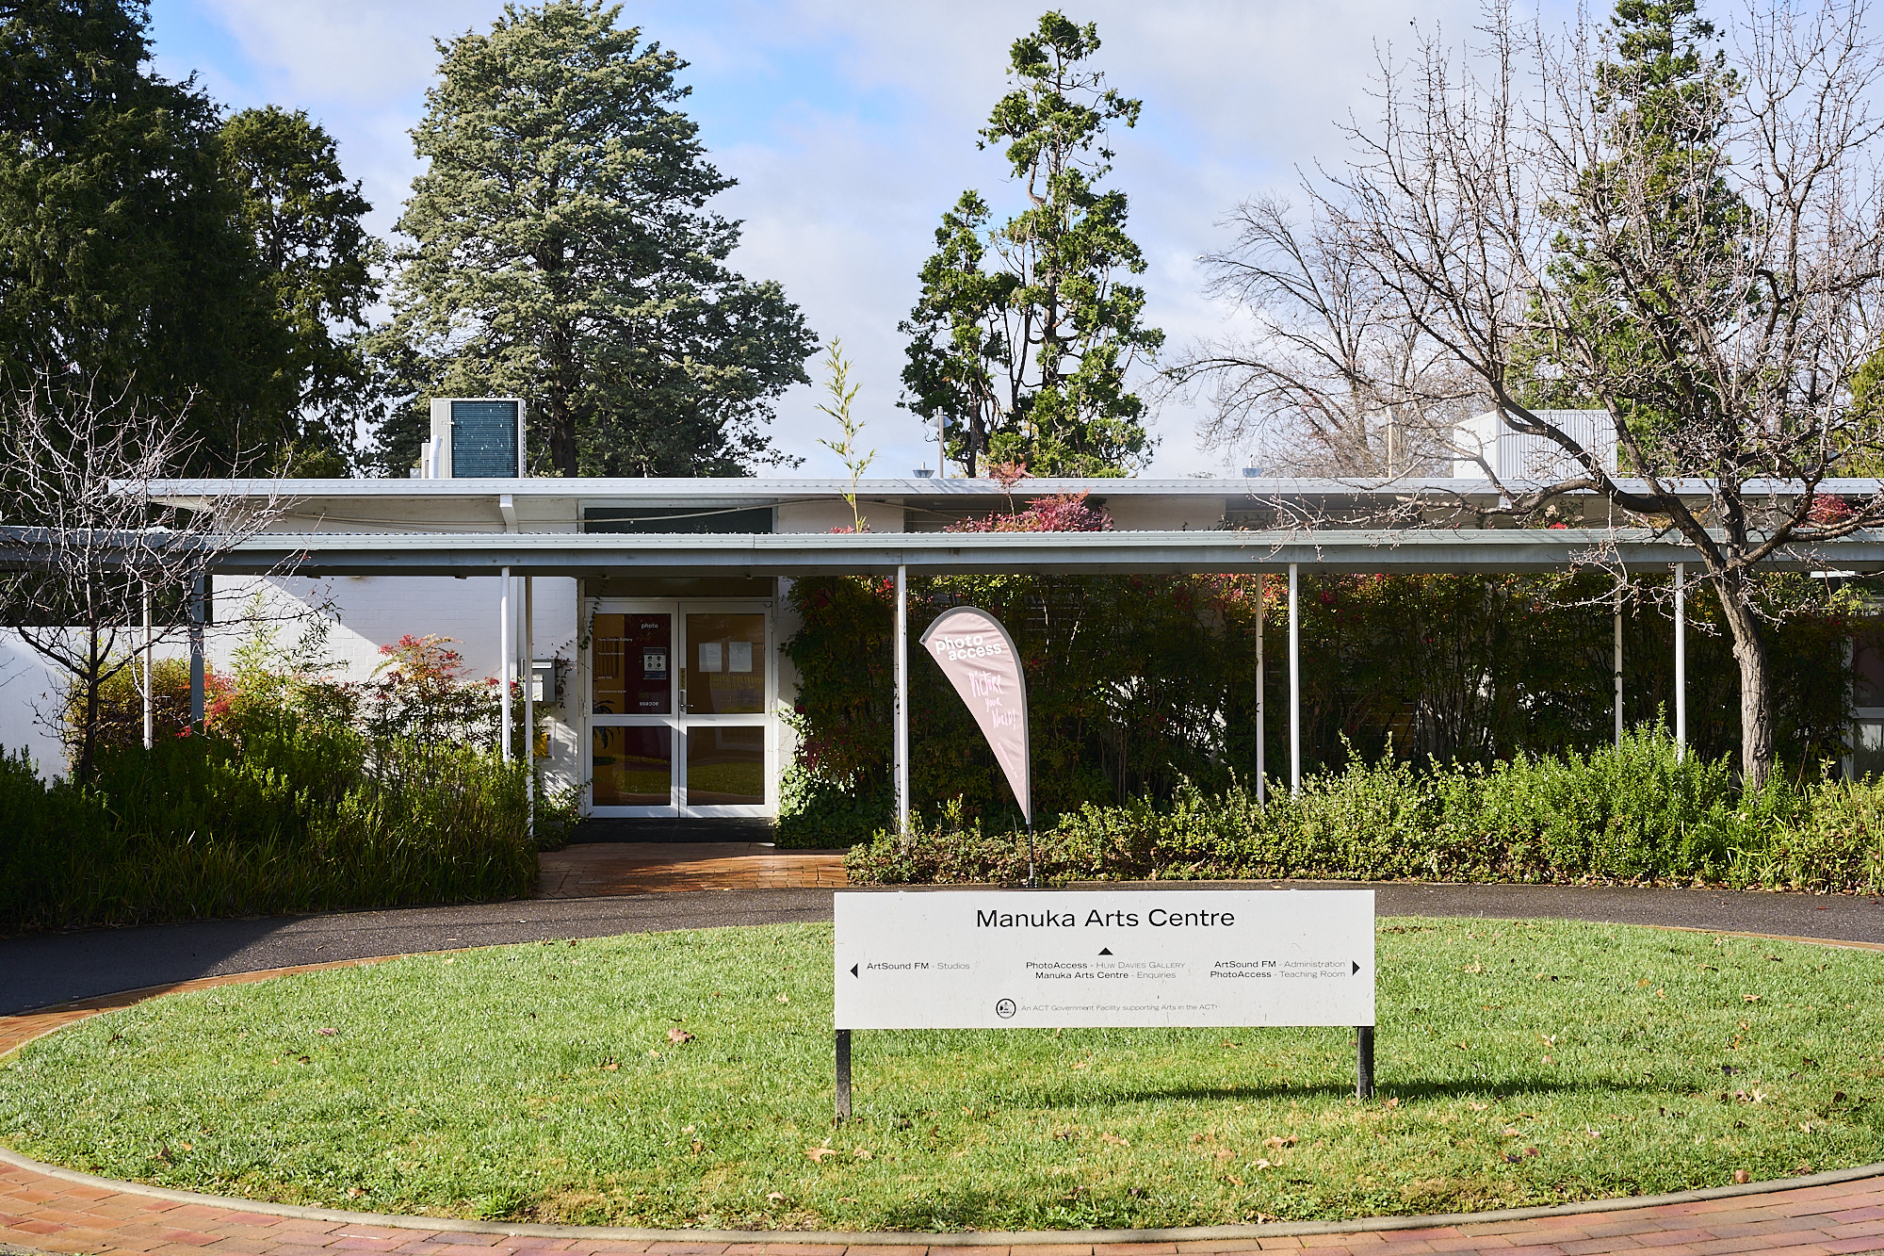 Photograph at the front of the white single story photo access building with a grassy roundabout and a sign saying "Manuka Arts Centre" in front on a blue sunny day.